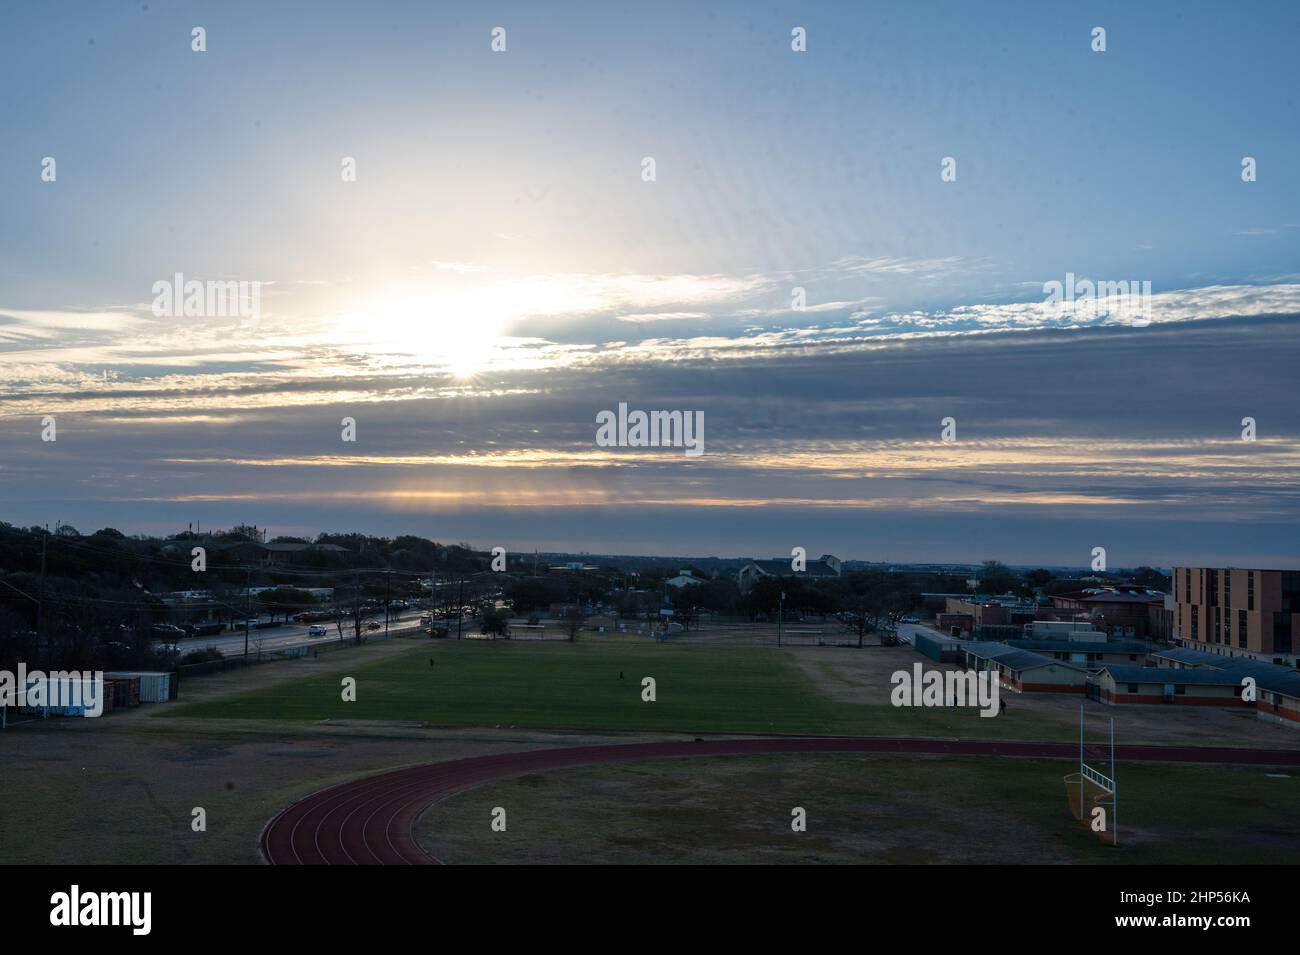 Austin, Texas, USA. 18 February, 2022. Runners on the track at Murchison Middle School. Austin wakes to freezing temperatures. Sunrise on Murchison Hill in Northwest Austin as people dressed for cold weather make their way to work. . Credit: Sidney Bruere/Alamy Live News Stock Photo